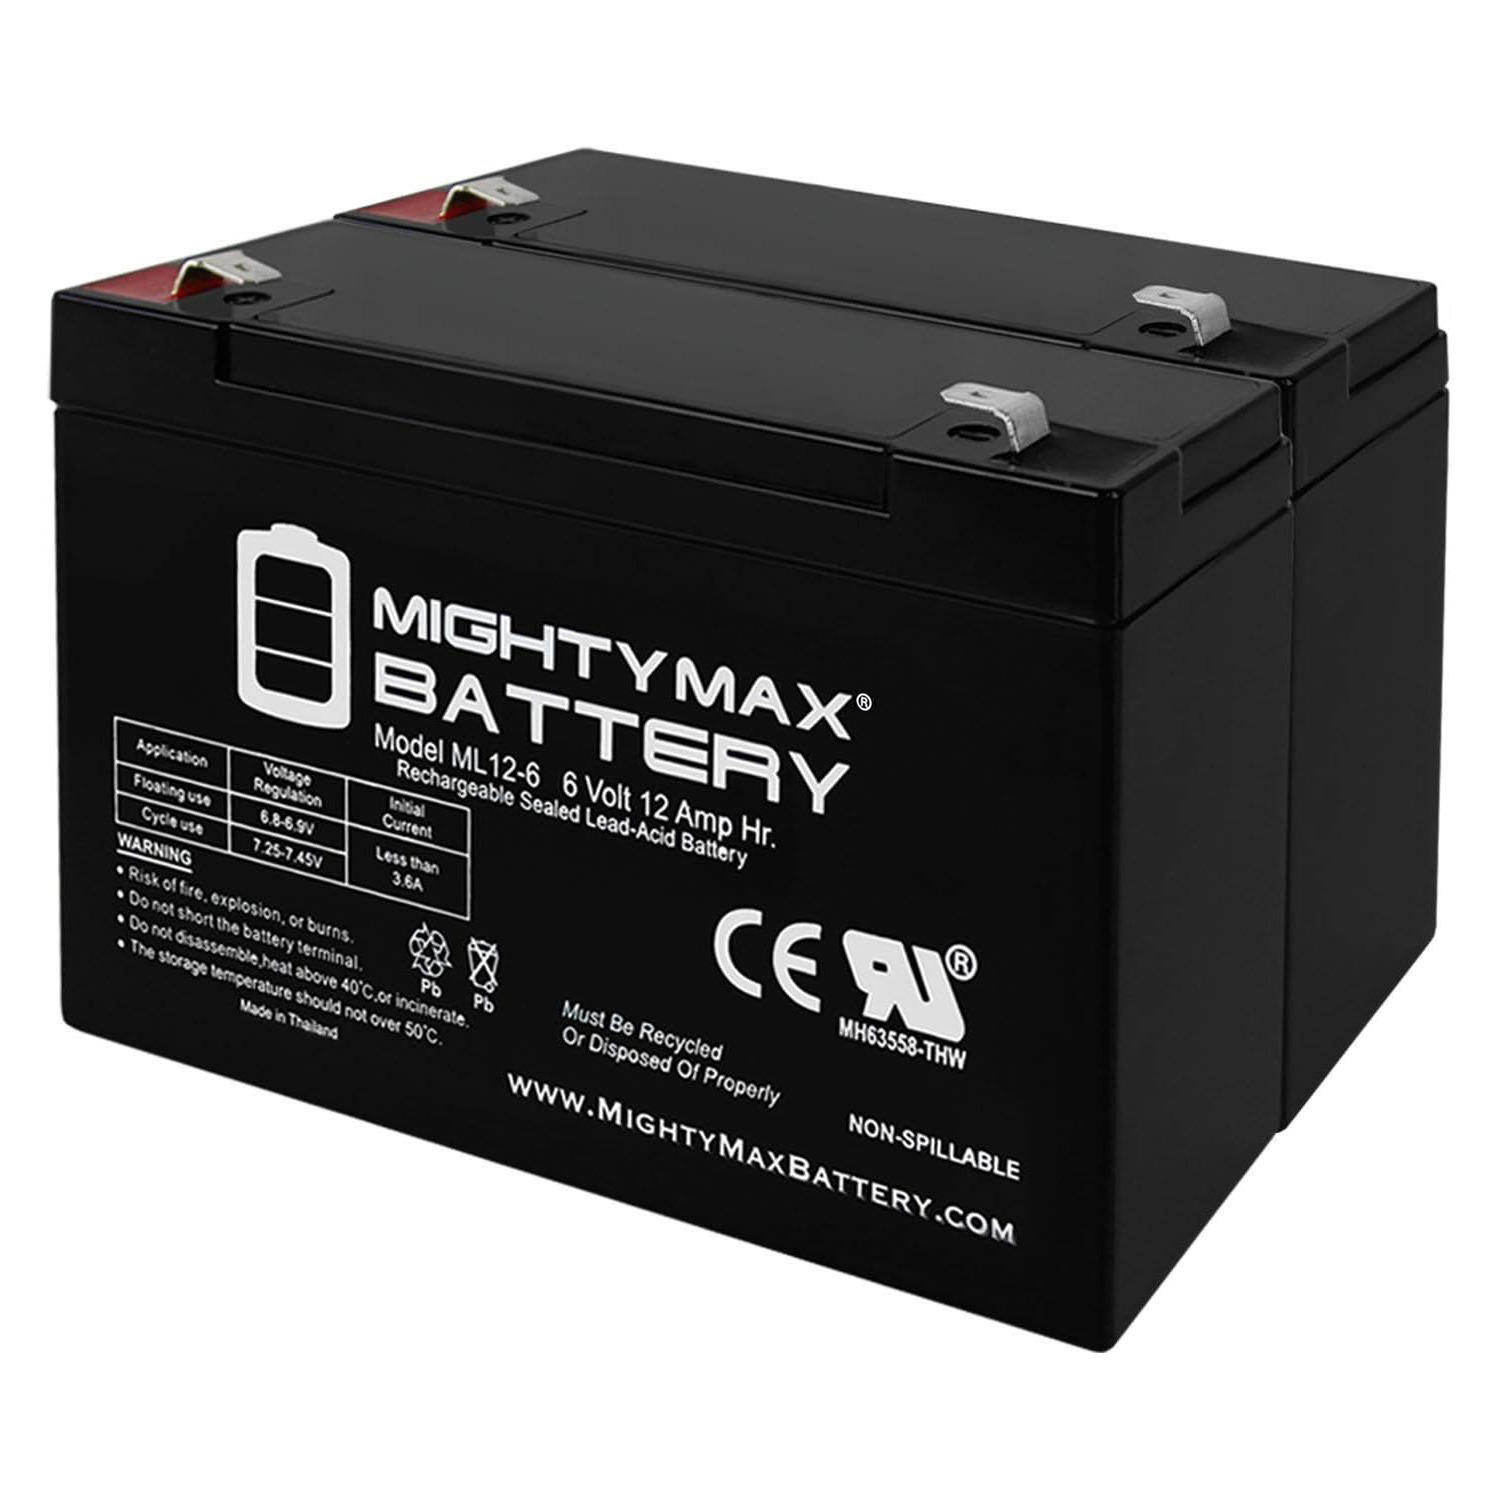 6V 12AH F2 Replacement Battery for ELS 6VLC30 - 2 Pack